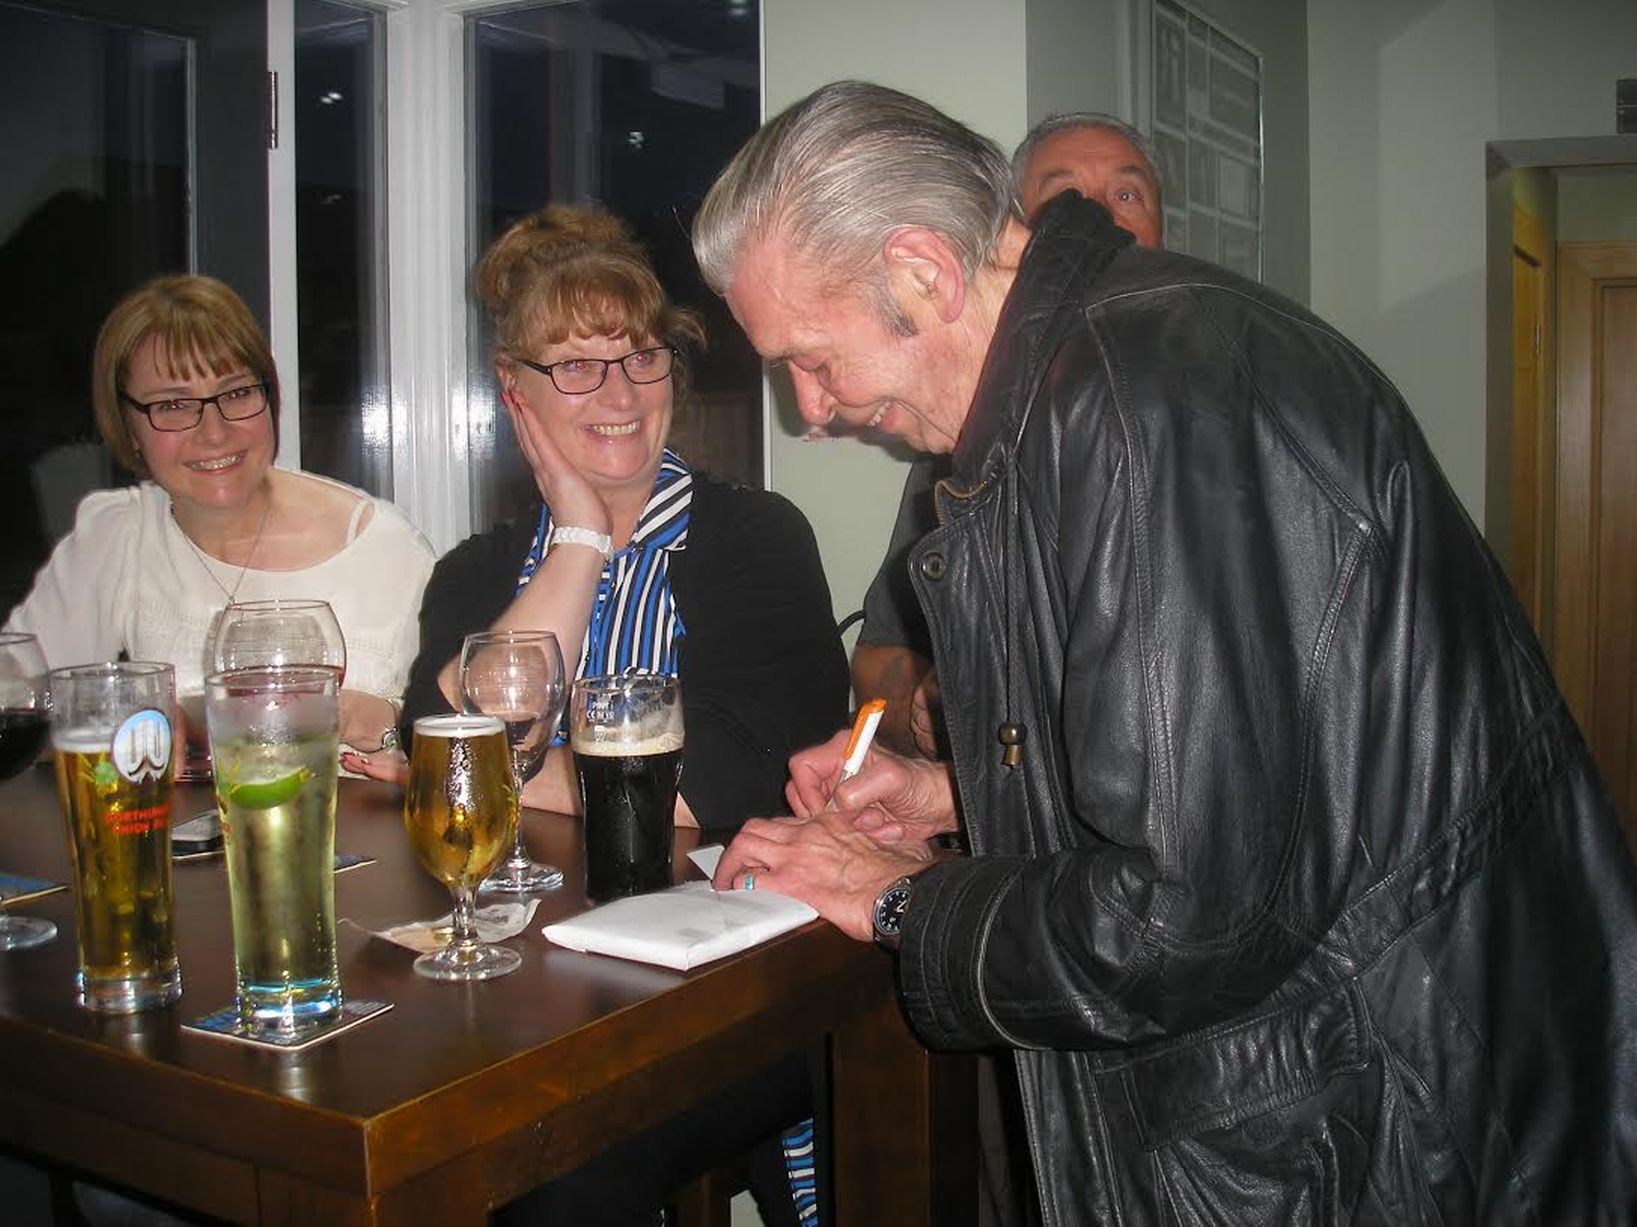 Ted Kingsize Taylor signs autographs at Taylors on Liverpool Road in Birkdale, Southport in 2016. Photo by Denise Roney